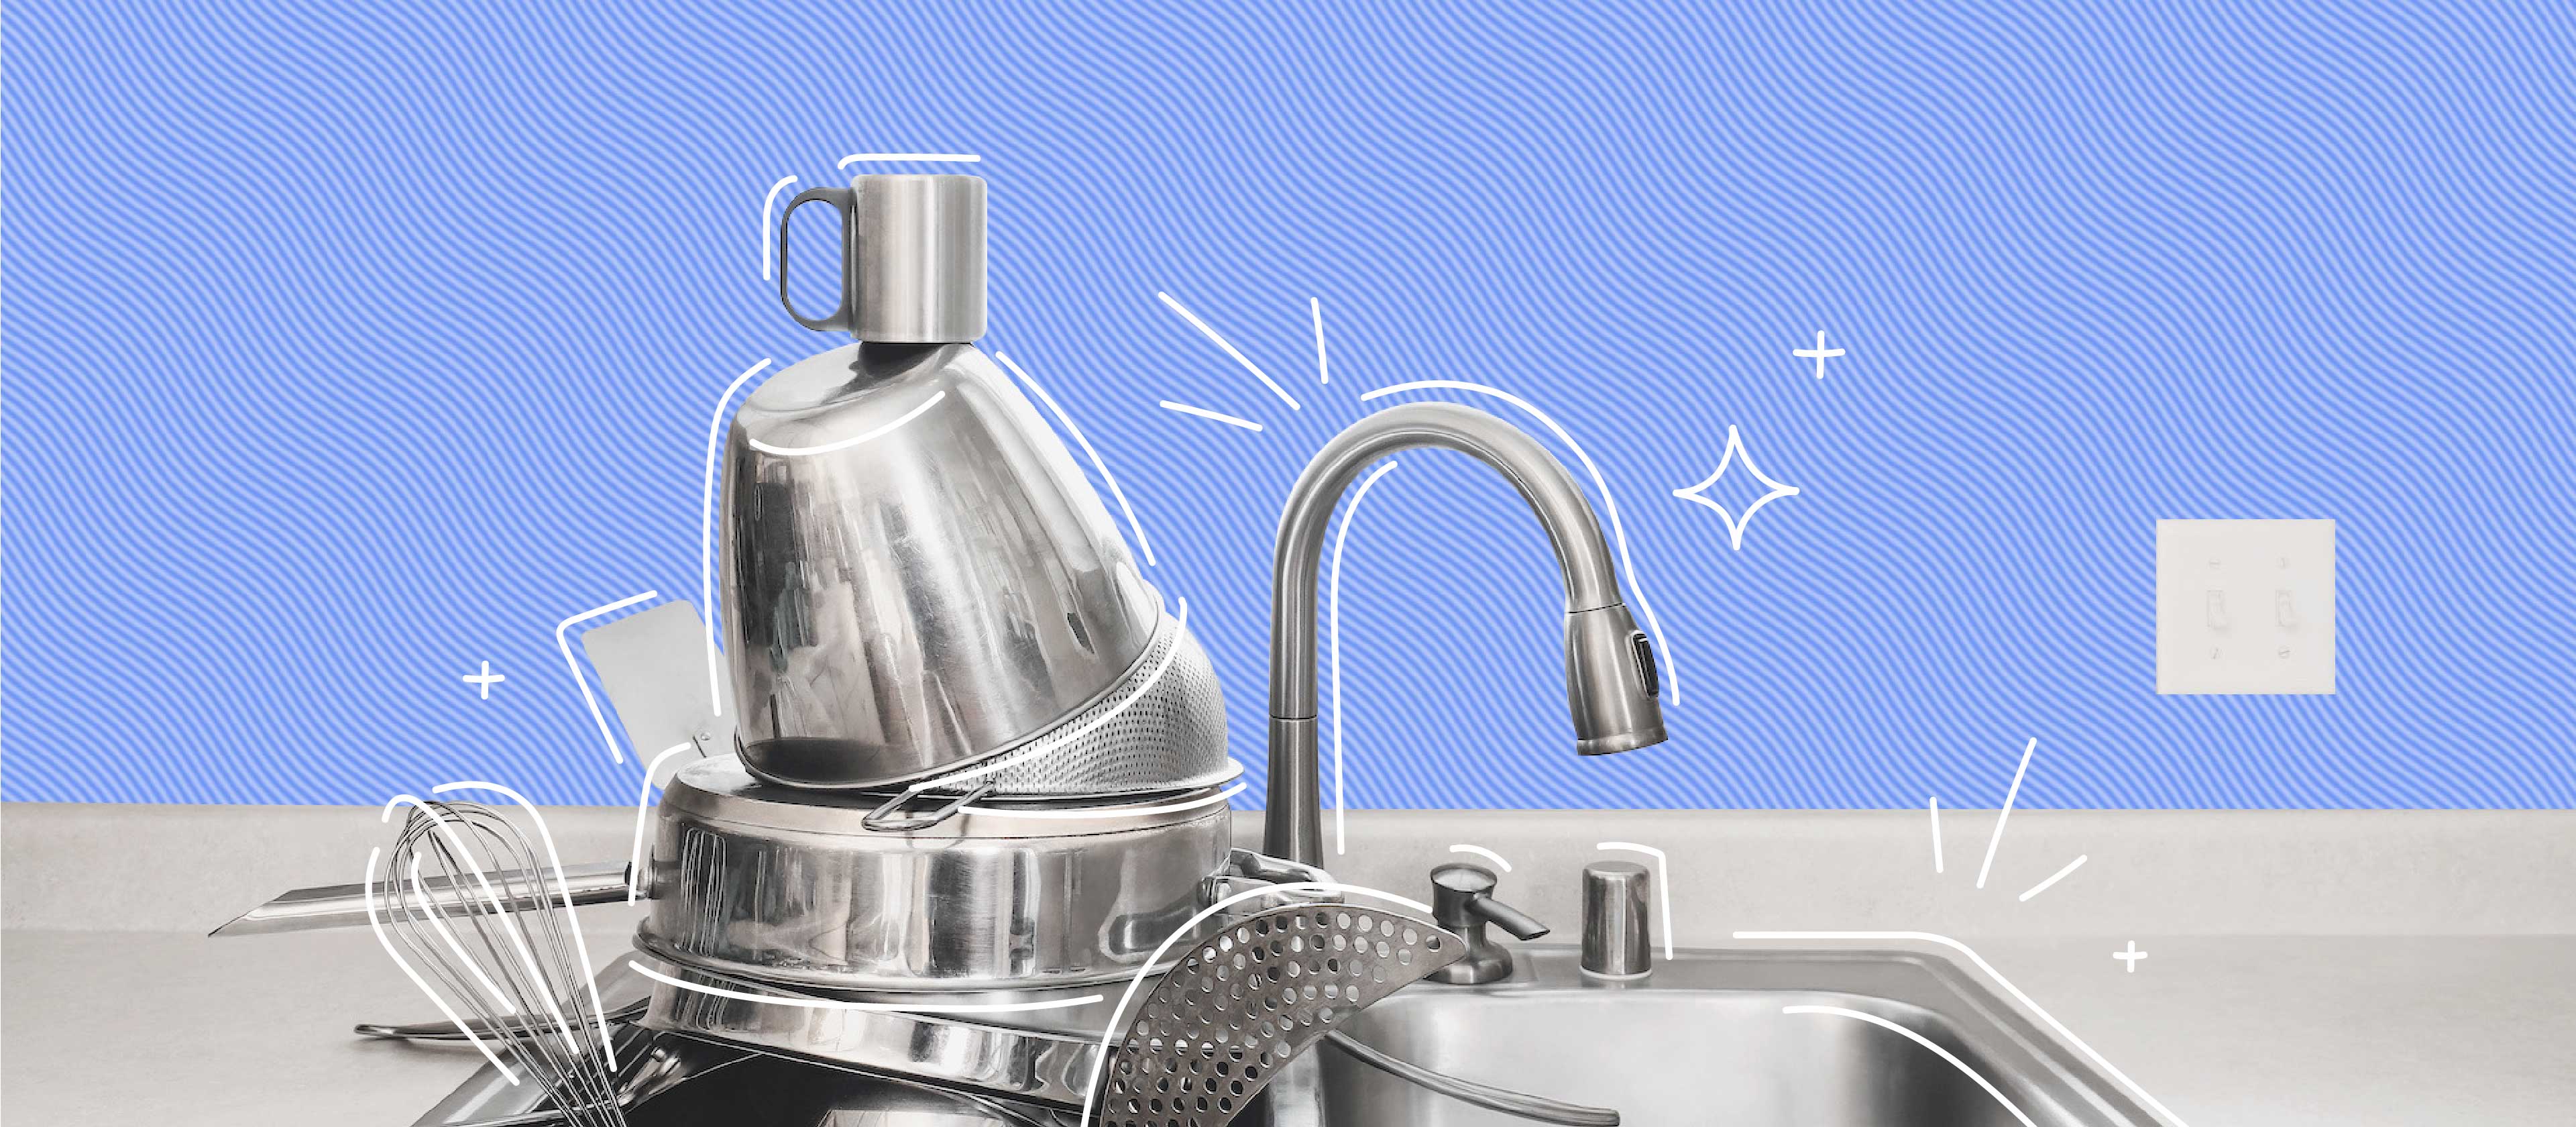 How to Clean Stainless-Steel Appliances and Kitchen Items the Right Way